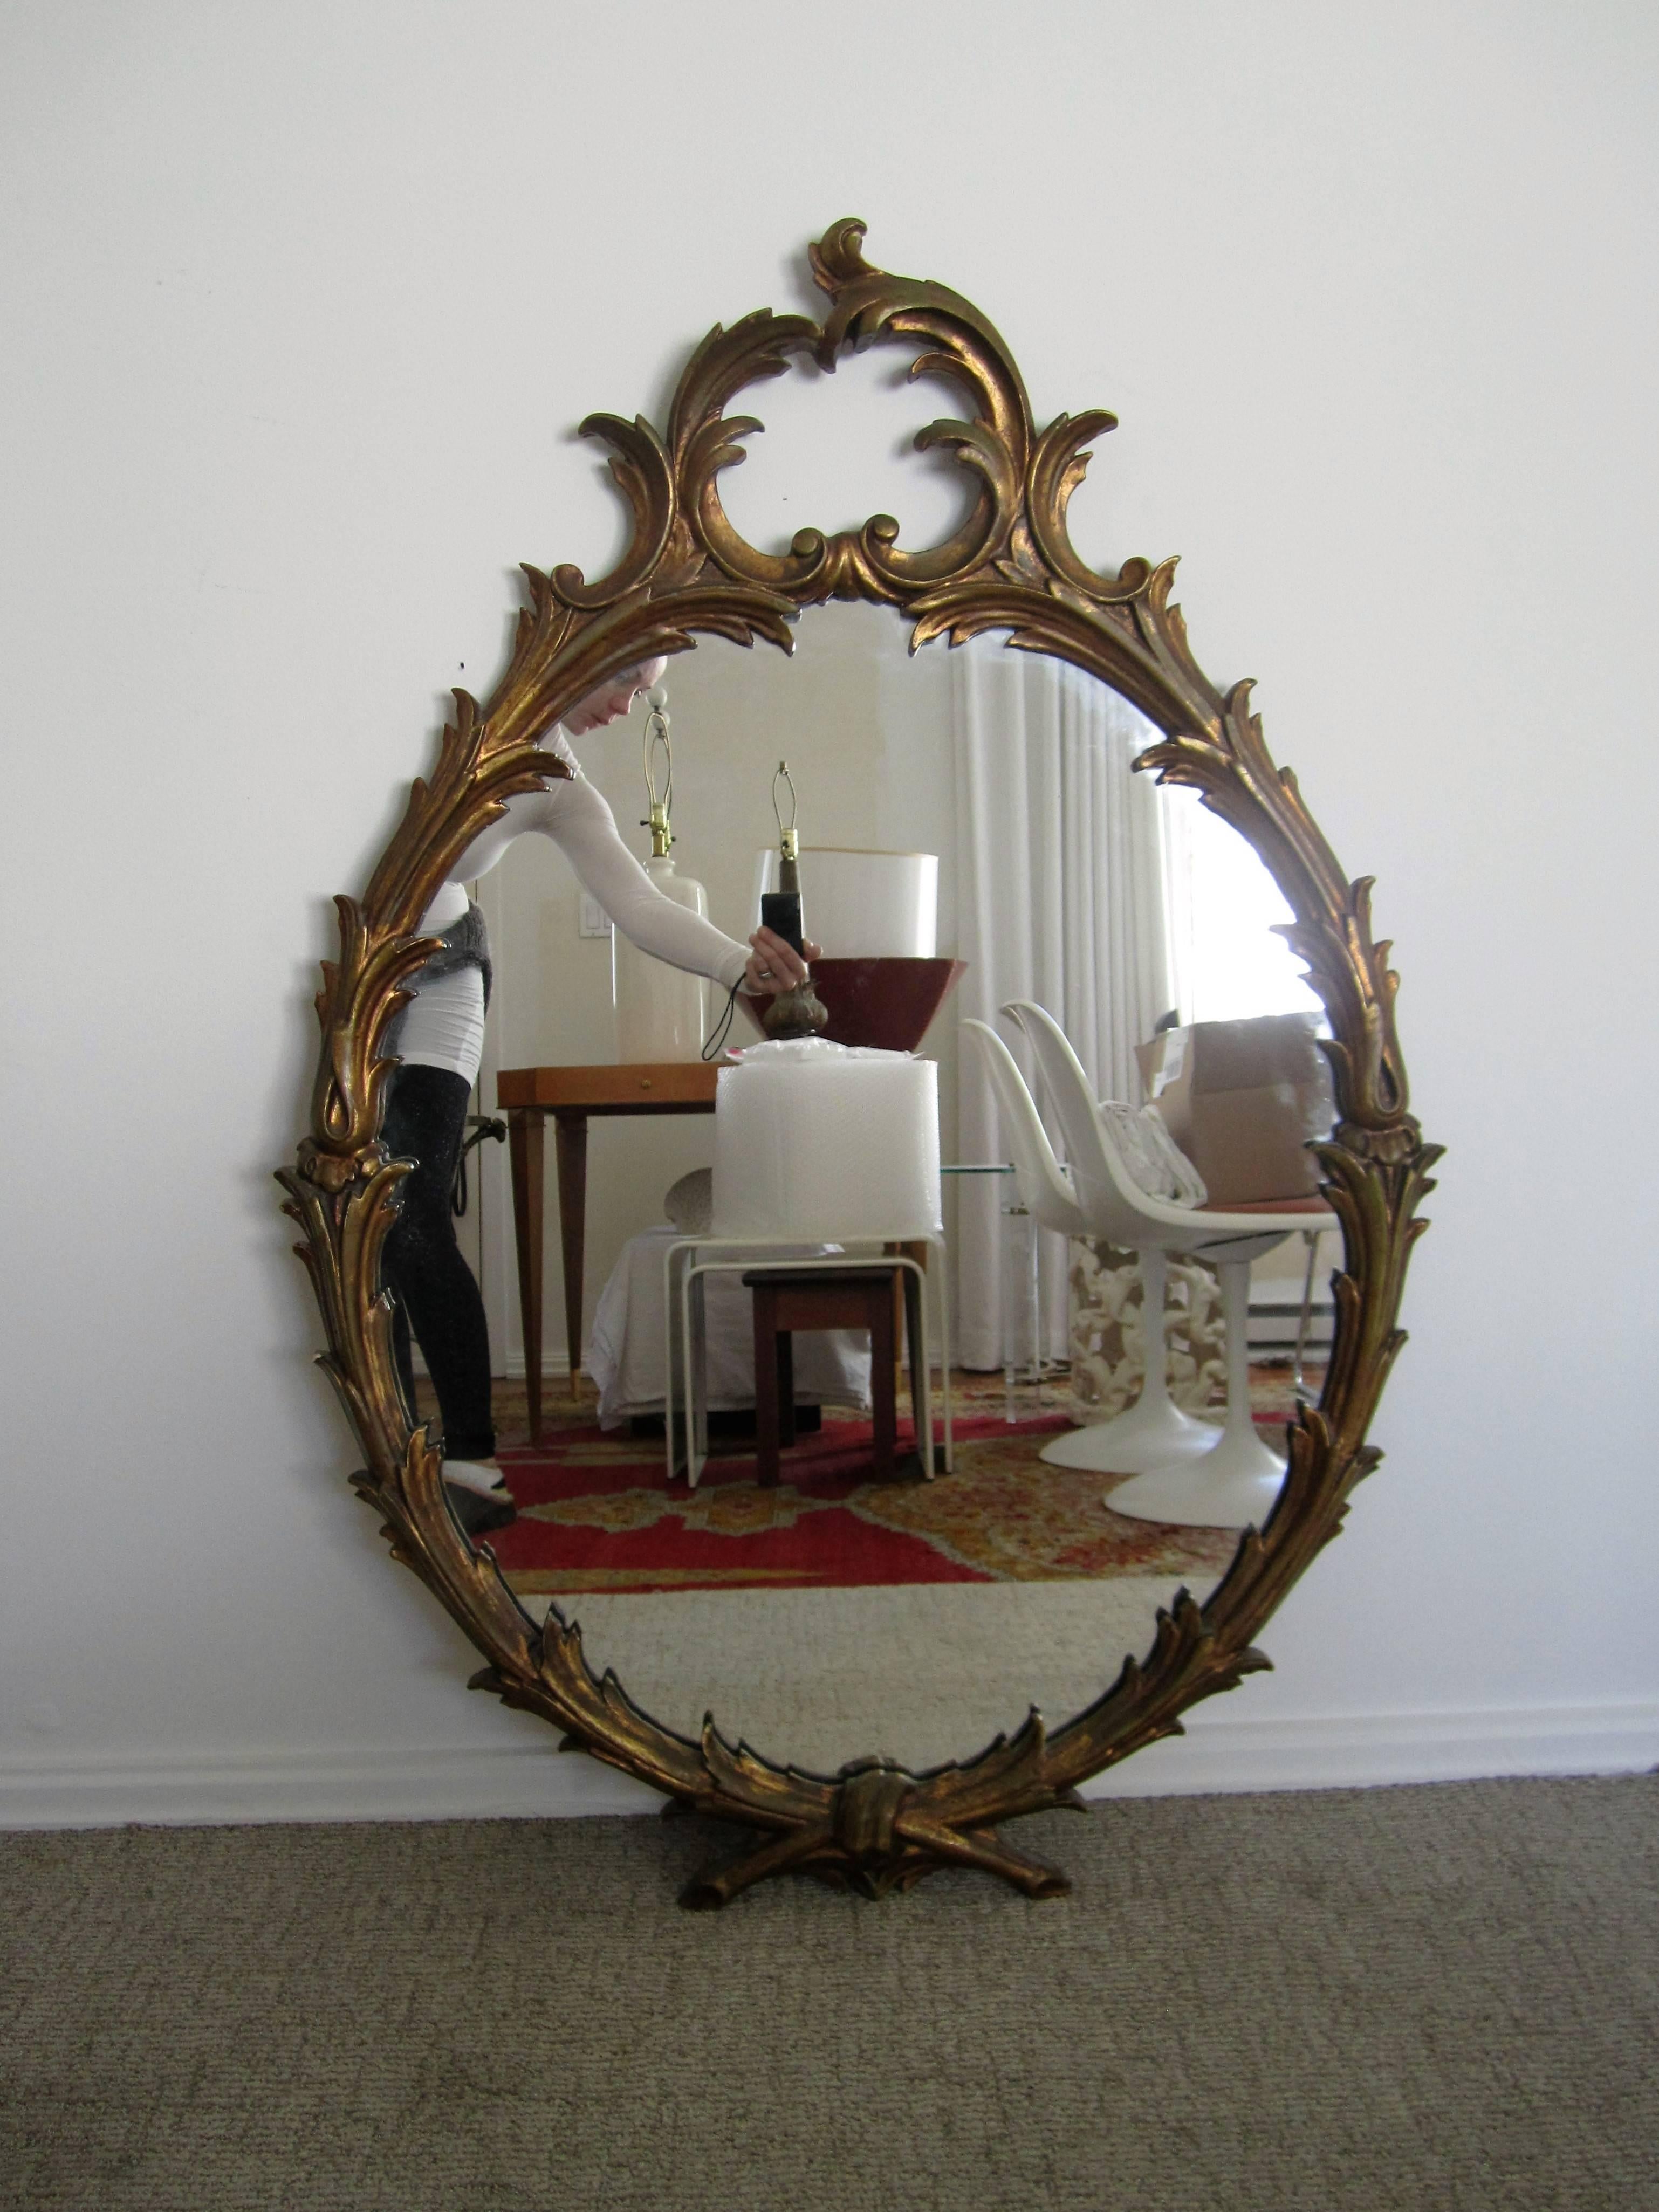 A substantial vintage oval Italian gold giltwood carved wall mirror with a vine design, circa mid-20th century, Italy. Marked 